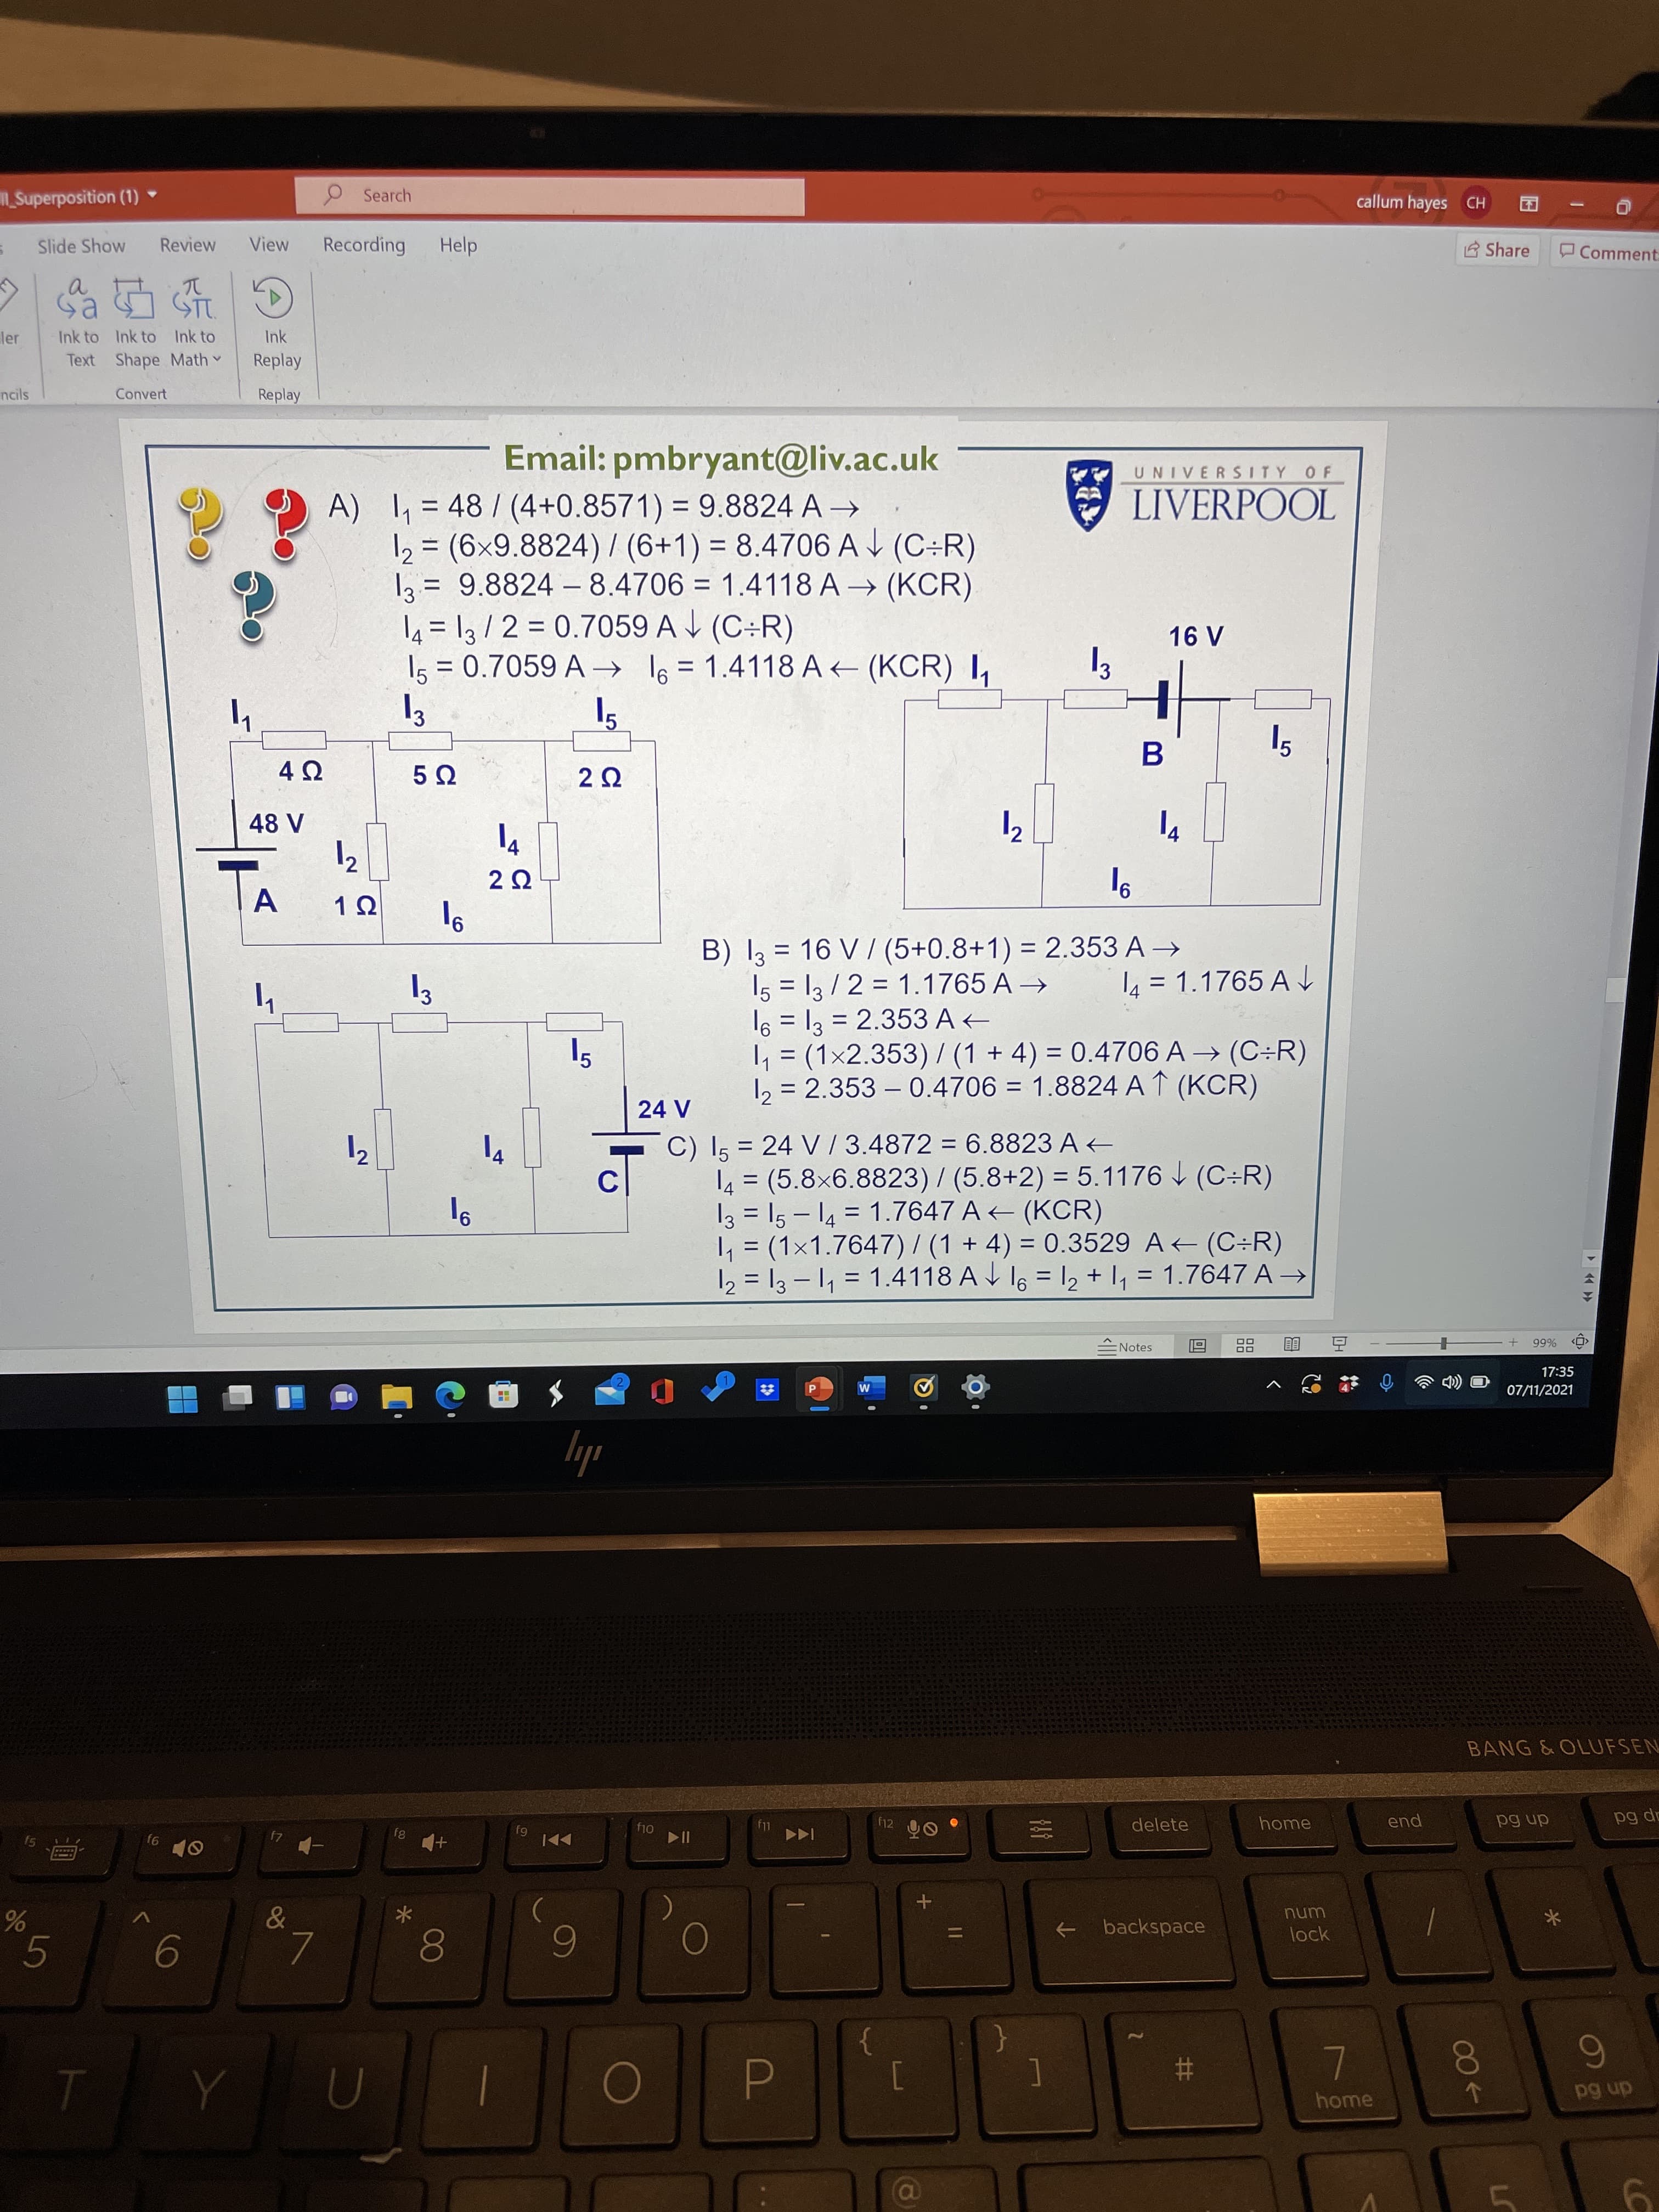 LS
%23
5
2.
callum hayes CH
P Search
E Share
Comment
ISuperposition (1) *
View
Recording
Help
Review
Slide Show
a.
Ink
Ink to Ink to Ink to
er
Text Shape Math
Replay
Convert
Replay
ncils
UNIVERSITY OF
Email: pmbryant@liv.ac.uk
E LIVERPOOL
A) = 48/ (4+0.8571) = 9.8824 A →
12 = (6x9.8824) / (6+1) = 8.4706 AJ (C÷R)
2 = 9.8824 –8.4706 = 1.4118 A → (KCR)
4 = 13/ 2 = 0.7059 A V (C÷R)
Is = 0.7059 A → l6 = 1.4118 A + (KCR) I,
%3D
%3D
|
%3D
%3D
%3D
3
B) I3 = 16 V / (5+0.8+1) = 2.353 A →
I5 = 13/2 = 1.1765 A →
= 2.353 A
9,
4 = 1.1765 A
%3D
, = (1x2.353) / (1 + 4) = 0.4706 A → (C÷R)
12 = 2.353 – 0.4706 = 1.8824 A ↑ (KCR)
%3D
%D
4.
%3D
%3D
%3D
C) Is = 24 V /3.4872 = 6.8823 A +
4 = (5.8x6.8823)/ (5.8+2) = 5.1176 (C÷R)
I3 = 15 - 14 = 1.7647 A (KCR)
, = (1×1.7647) / (1 + 4) = 0.3529 A (C÷R)
12 = 13 – 1, = 1.4118 A V l6 = 12 + 1, = 1.7647 A →
%3D
%3D
C.
%3D
%3D
%3D
%66
ENotes
17:35
07/11/2021
M
ily
BANG &OLUFSEN
end
ap 6d
home
dn 6d
delete
f12
f11
6J
unu
lock
backspace
->
80
5.
9.
0
6
}
{
dn 6d
home
